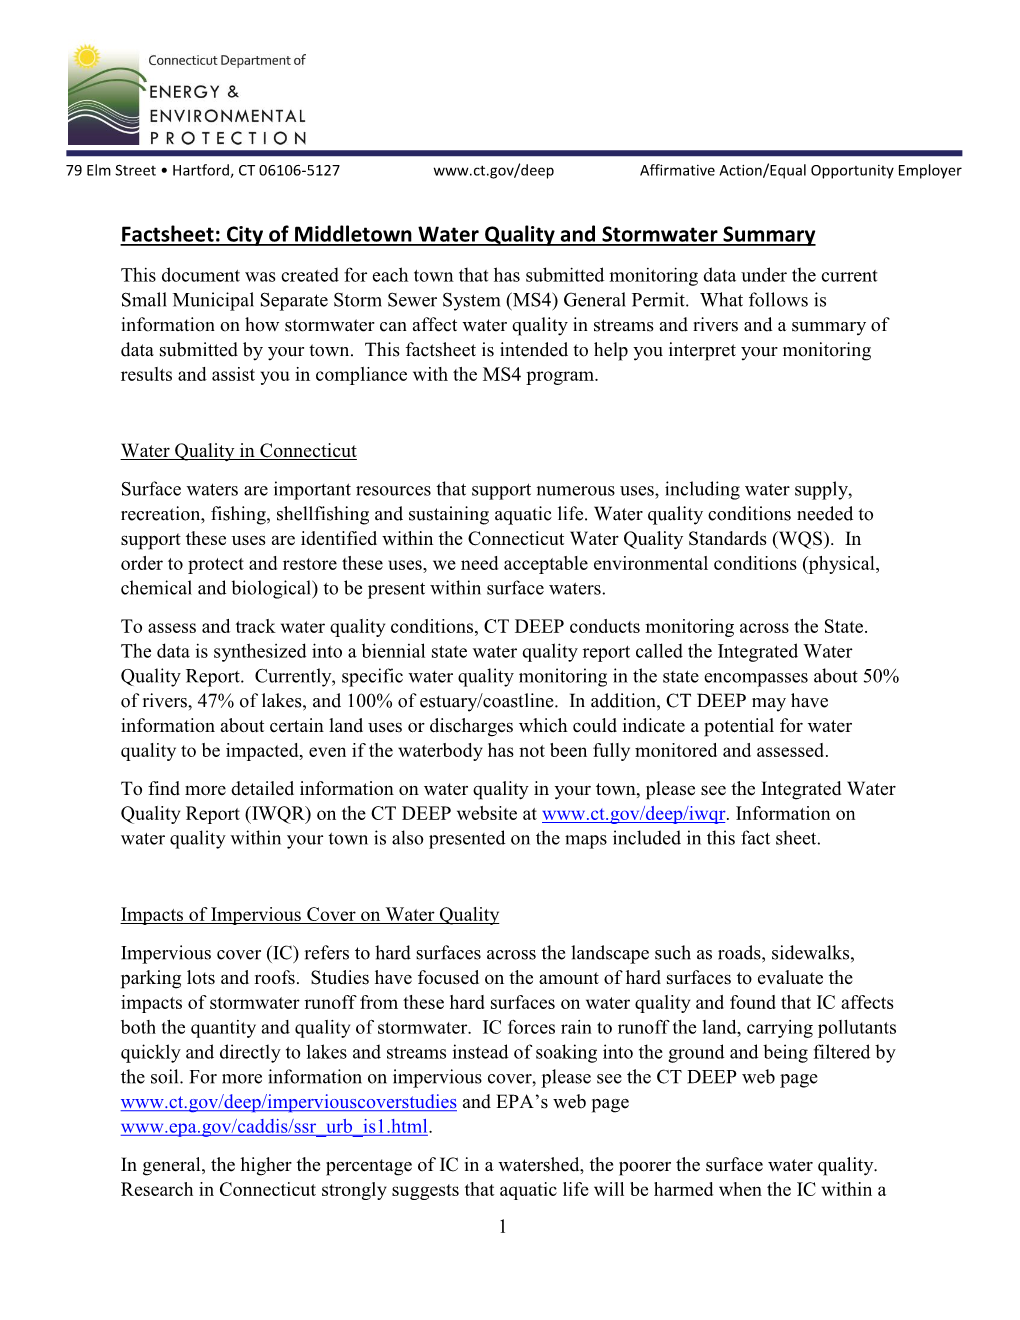 Factsheet: City of Middletown Water Quality and Stormwater Summary